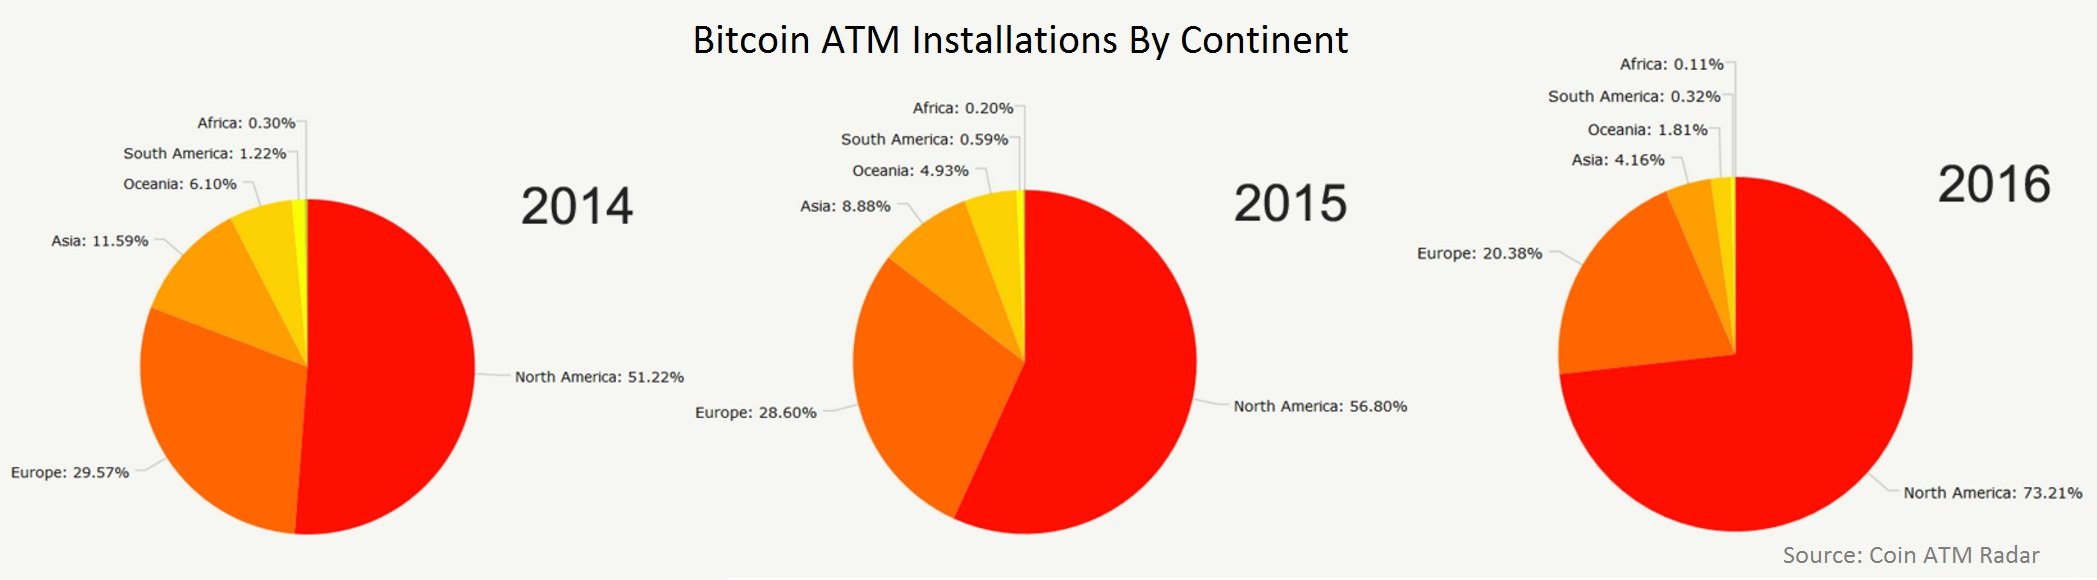 atm growth